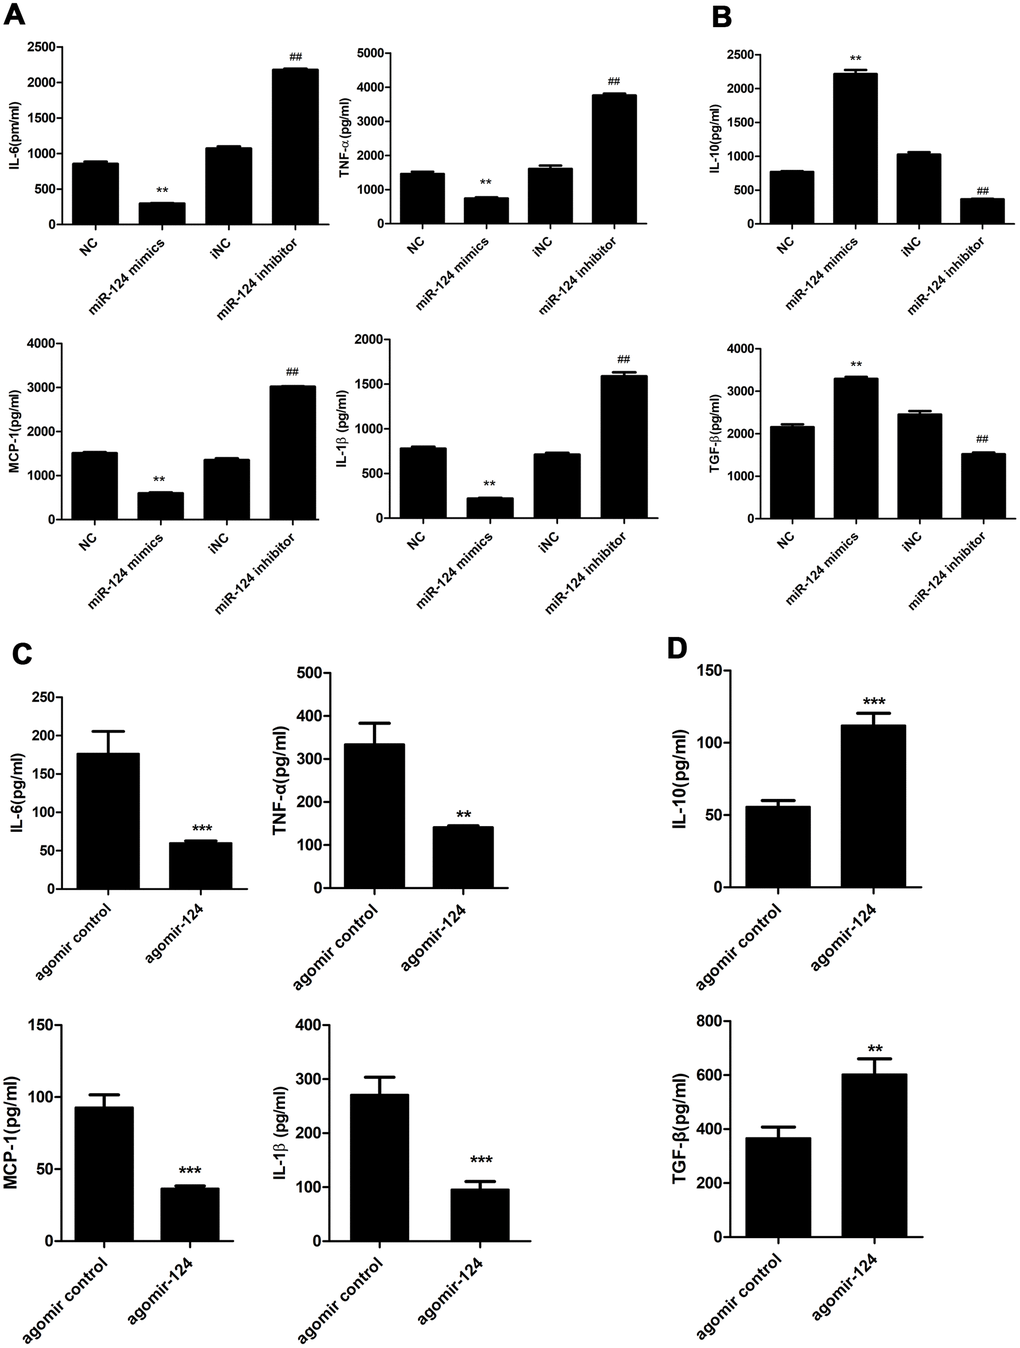 Effects of miR-124 on pro-inflammatory cytokines and anti-inflammatory cytokines in vitro and in vivo. (A) ELISA assay analysis of the protein levels of pro-inflammatory cytokines in RAW264.7 macrophage cells. (B) ELISA assay analysis of the protein levels of anti-inflammatory cytokines in RAW264.7 macrophage cells. RAW264.7 cells were transfected with the miR-124 mimics, inhibitor or negative control, then treated with ox-LDL. (C) ELISA analysis of the protein levels of pro-inflammatory cytokines in blood serum of atherosclerosis model mice treated with agomir control or agomir-124. (D) ELISA analysis of the protein levels of anti-inflammatory cytokines. NC, negative control; iNC, negative control of miR-124 inhibitor. **, P P P 